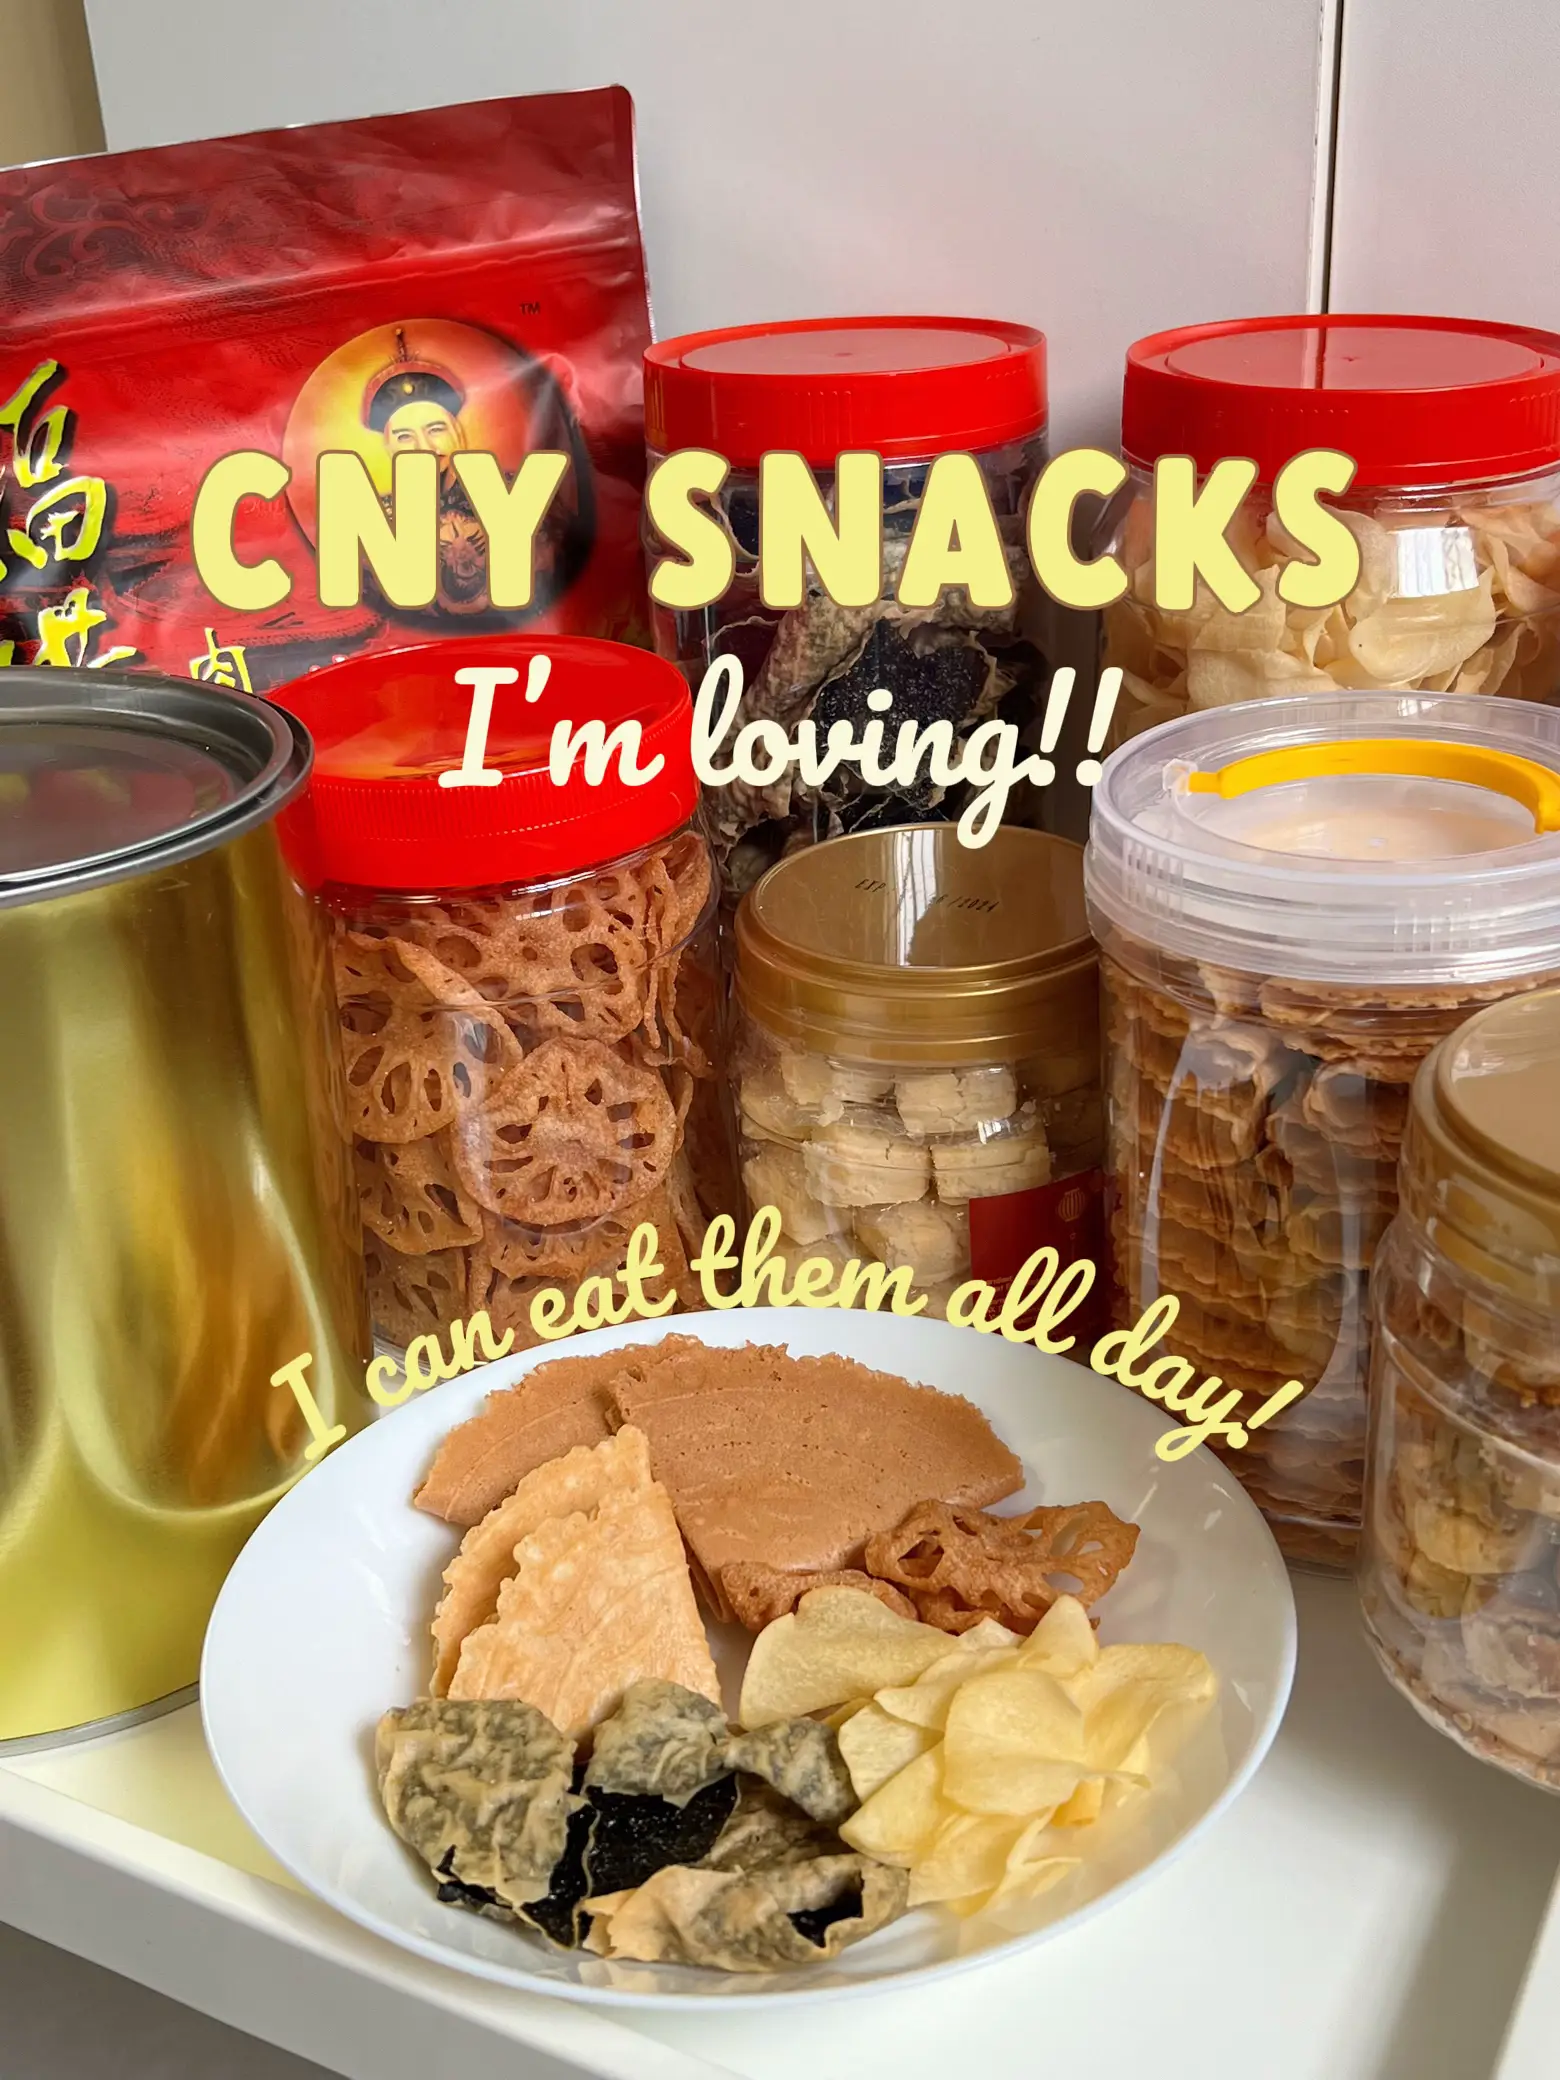 3 cny snacks you MUST GET this season! 🤤🍿🧧's images